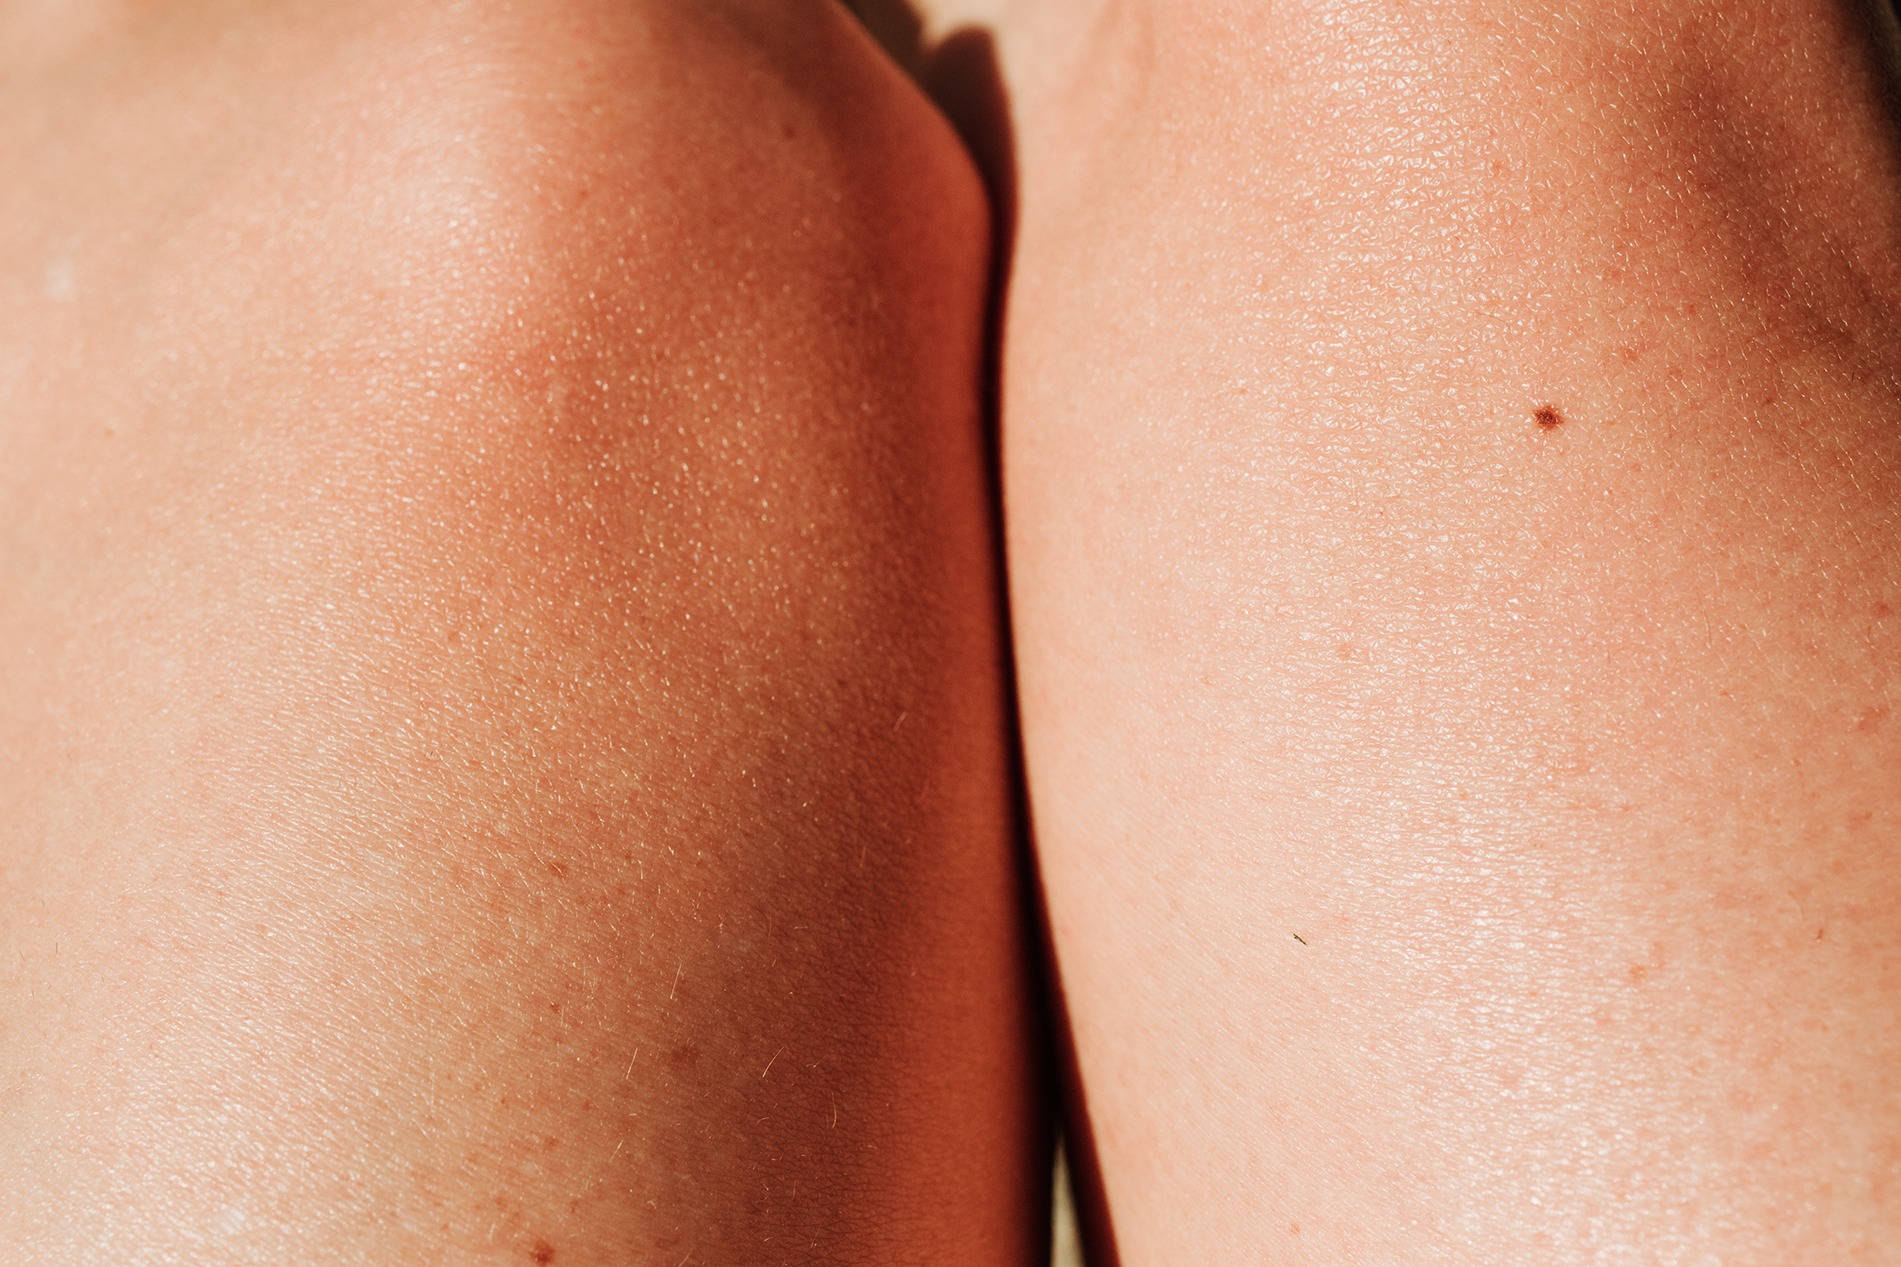 How to Prevent Chafing: 6 Steps to End Irritation